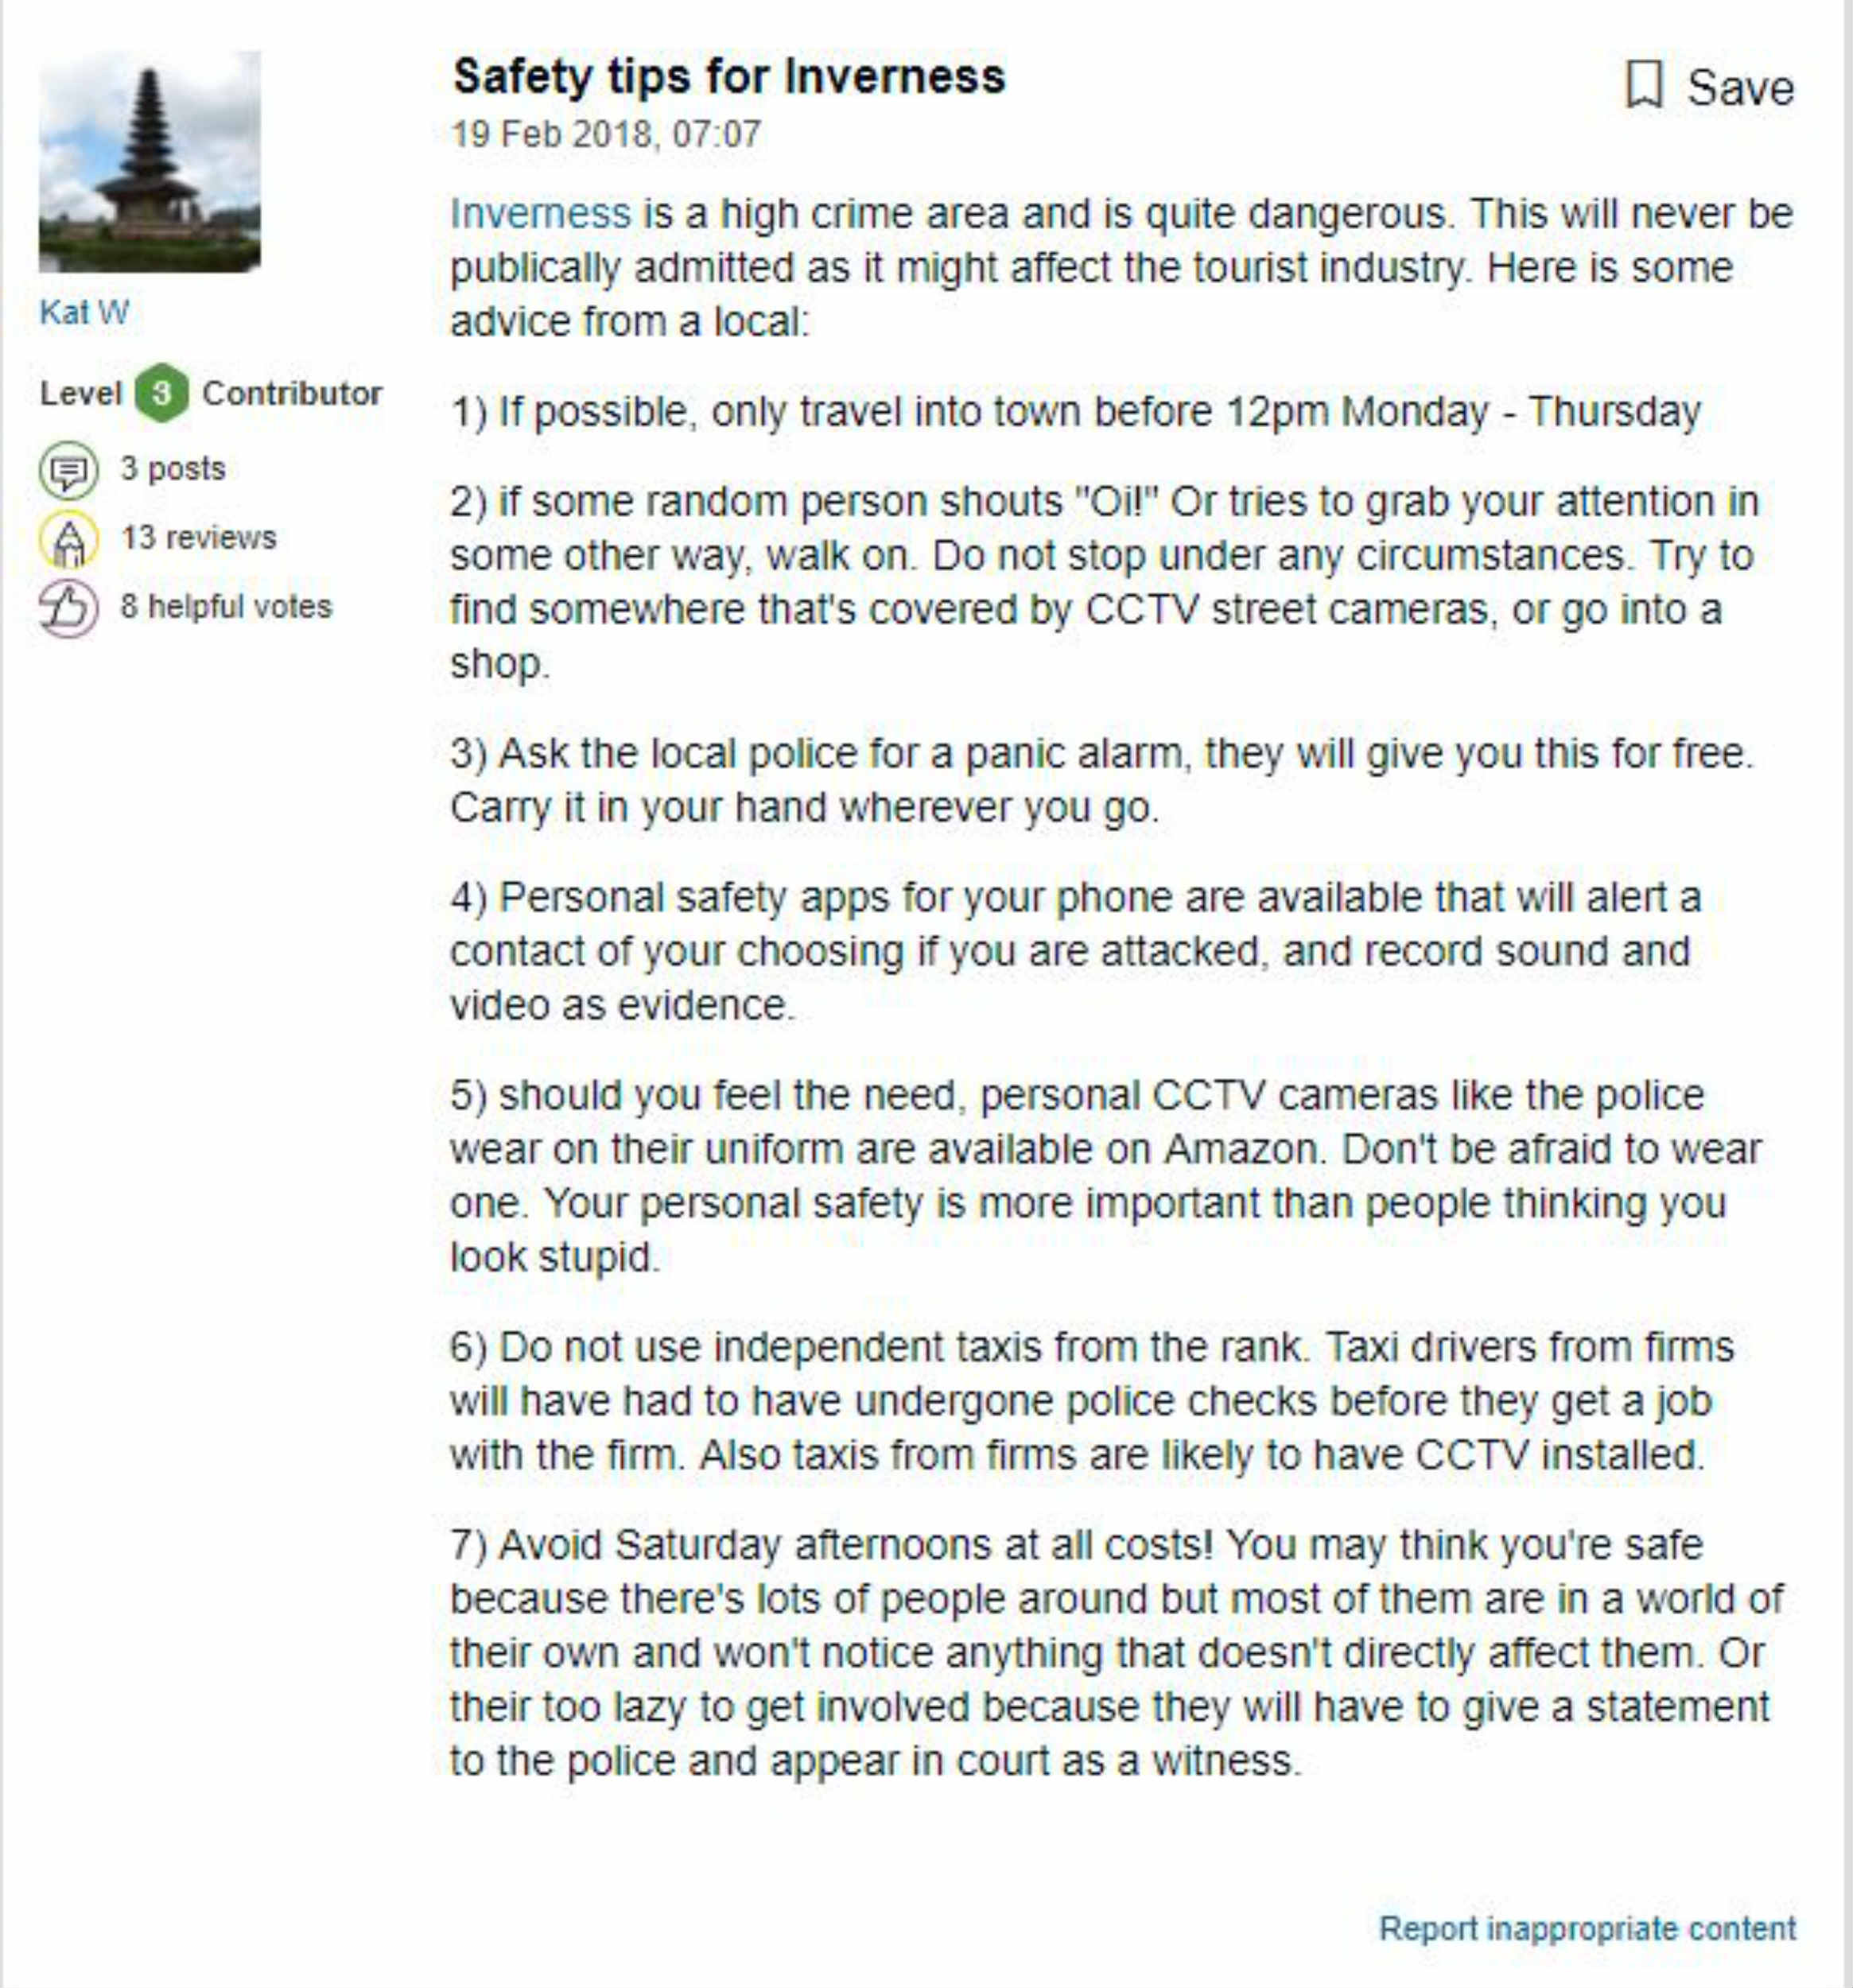 An Inverness local has taken to Trip Advisor to open a tirade against the city. Kat W posts a hilarious warning guide for tourists who may be thinking of visiting the Highland city.